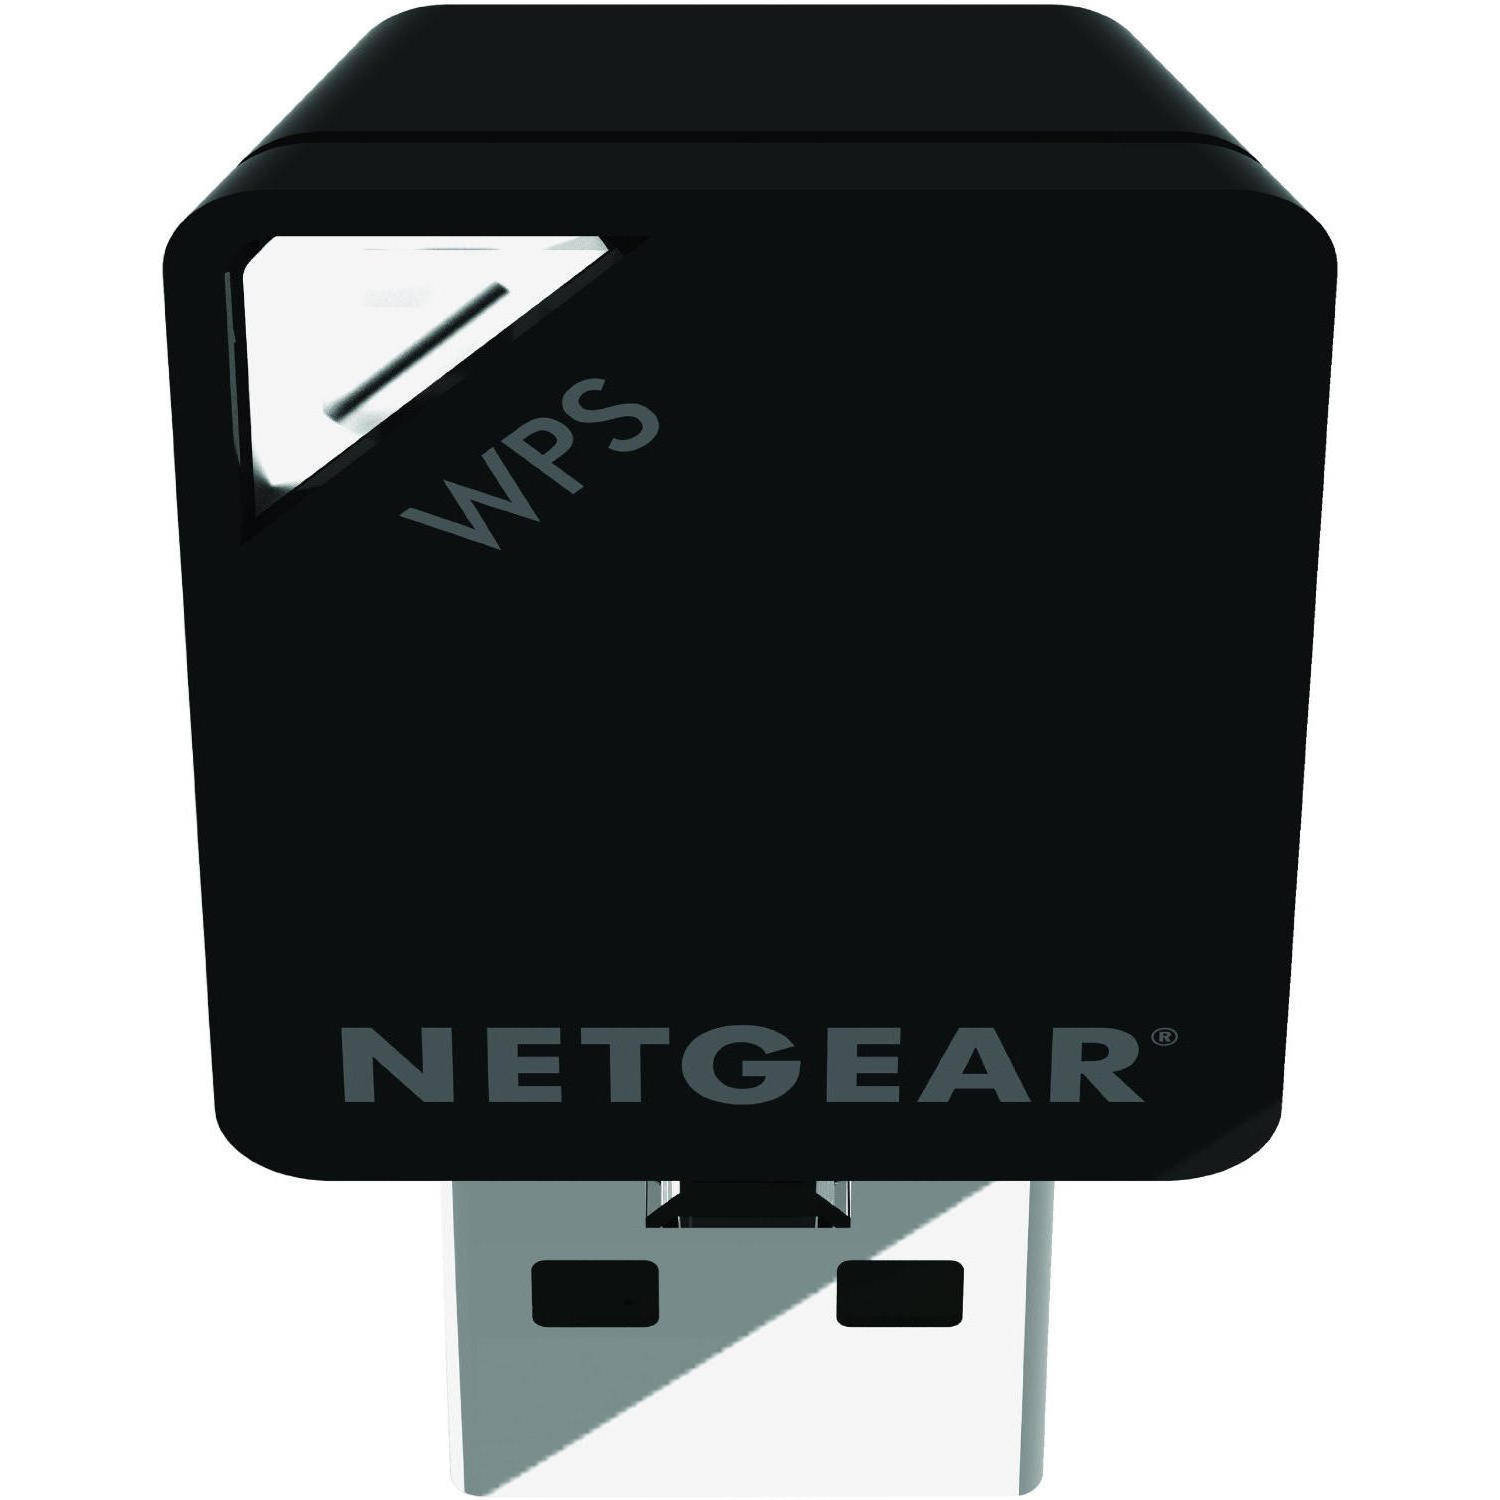 NETGEAR AC600 Dual Band WiFi USB Adapter, up to 433Mbps (A6100-10000s) - image 3 of 4